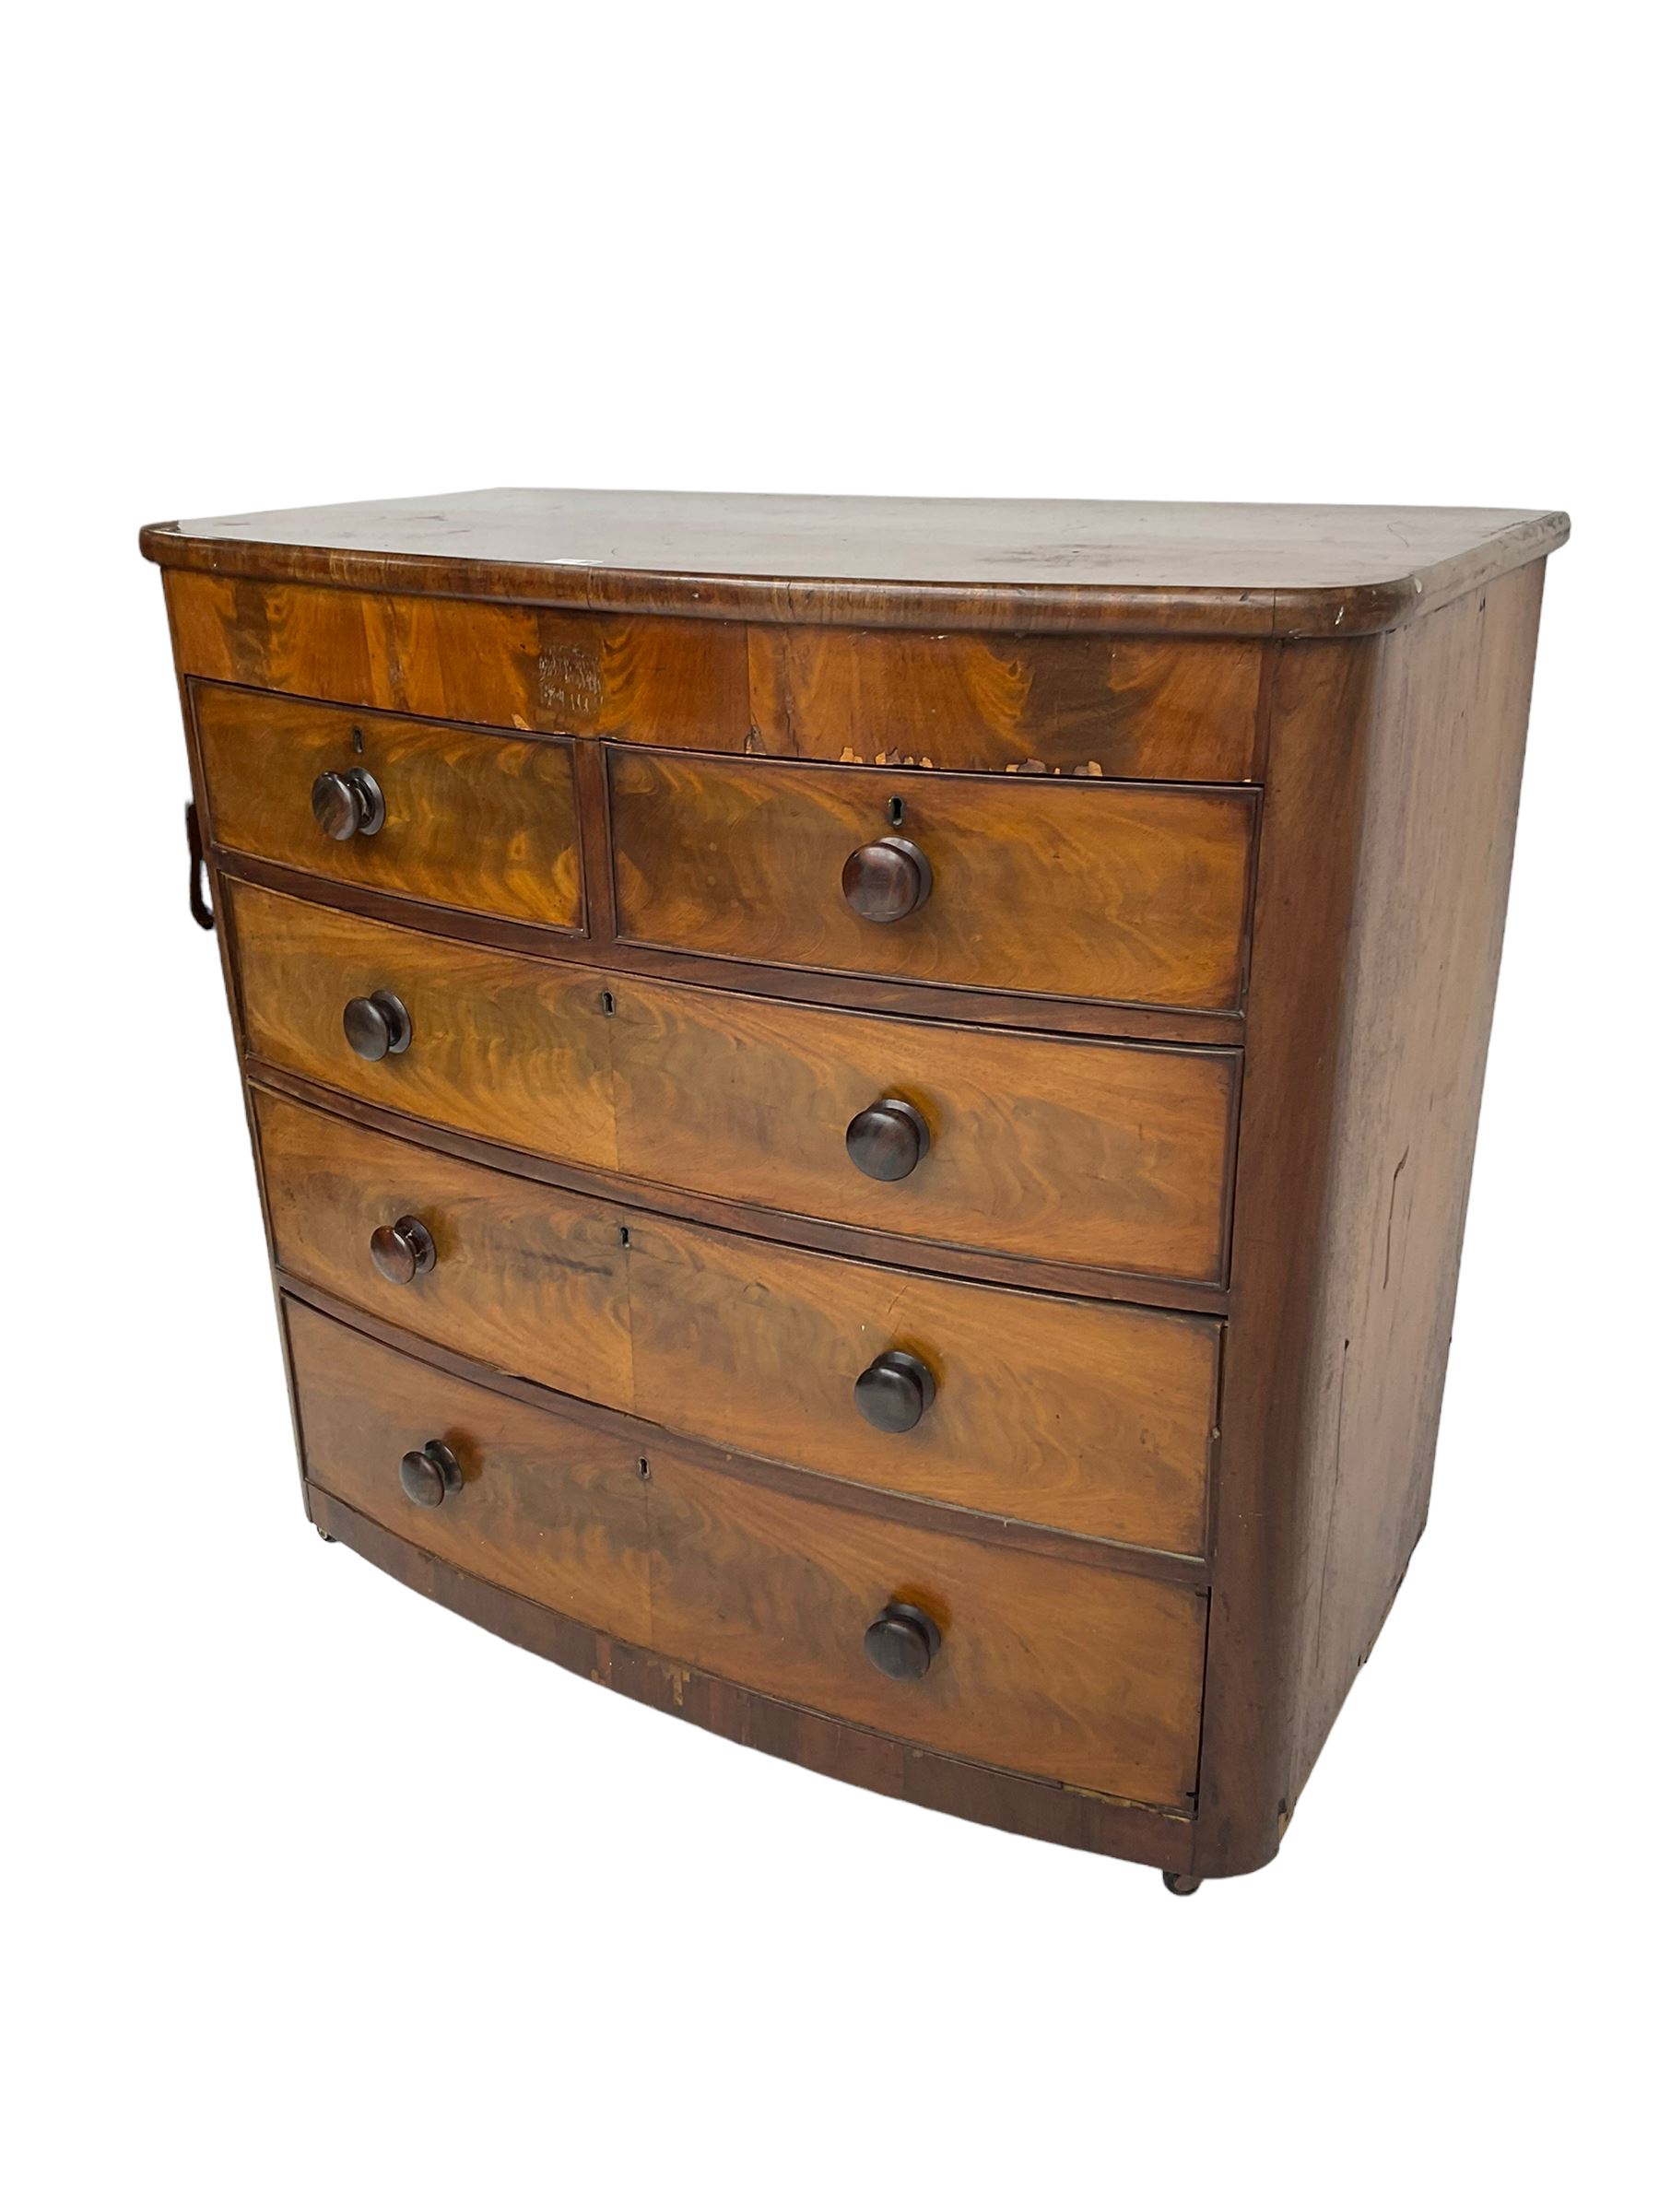 Late 19th century mahogany bow front chest - Image 6 of 7